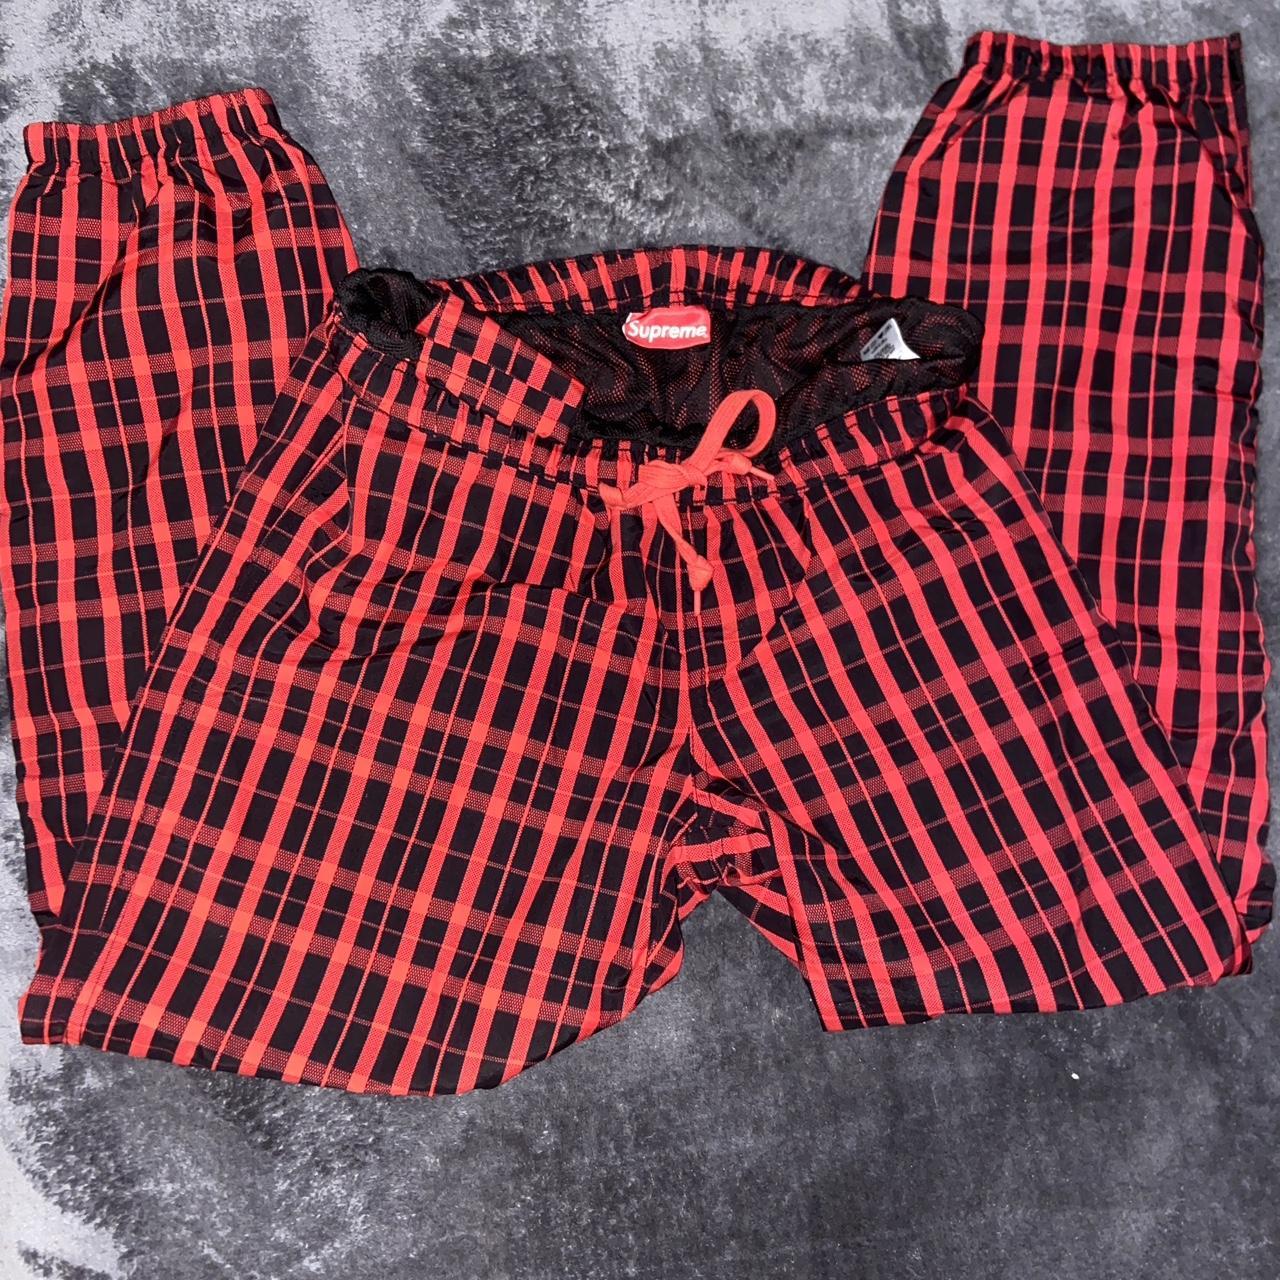 Supreme Nylon Plaid Track Pants in red and black -... - Depop